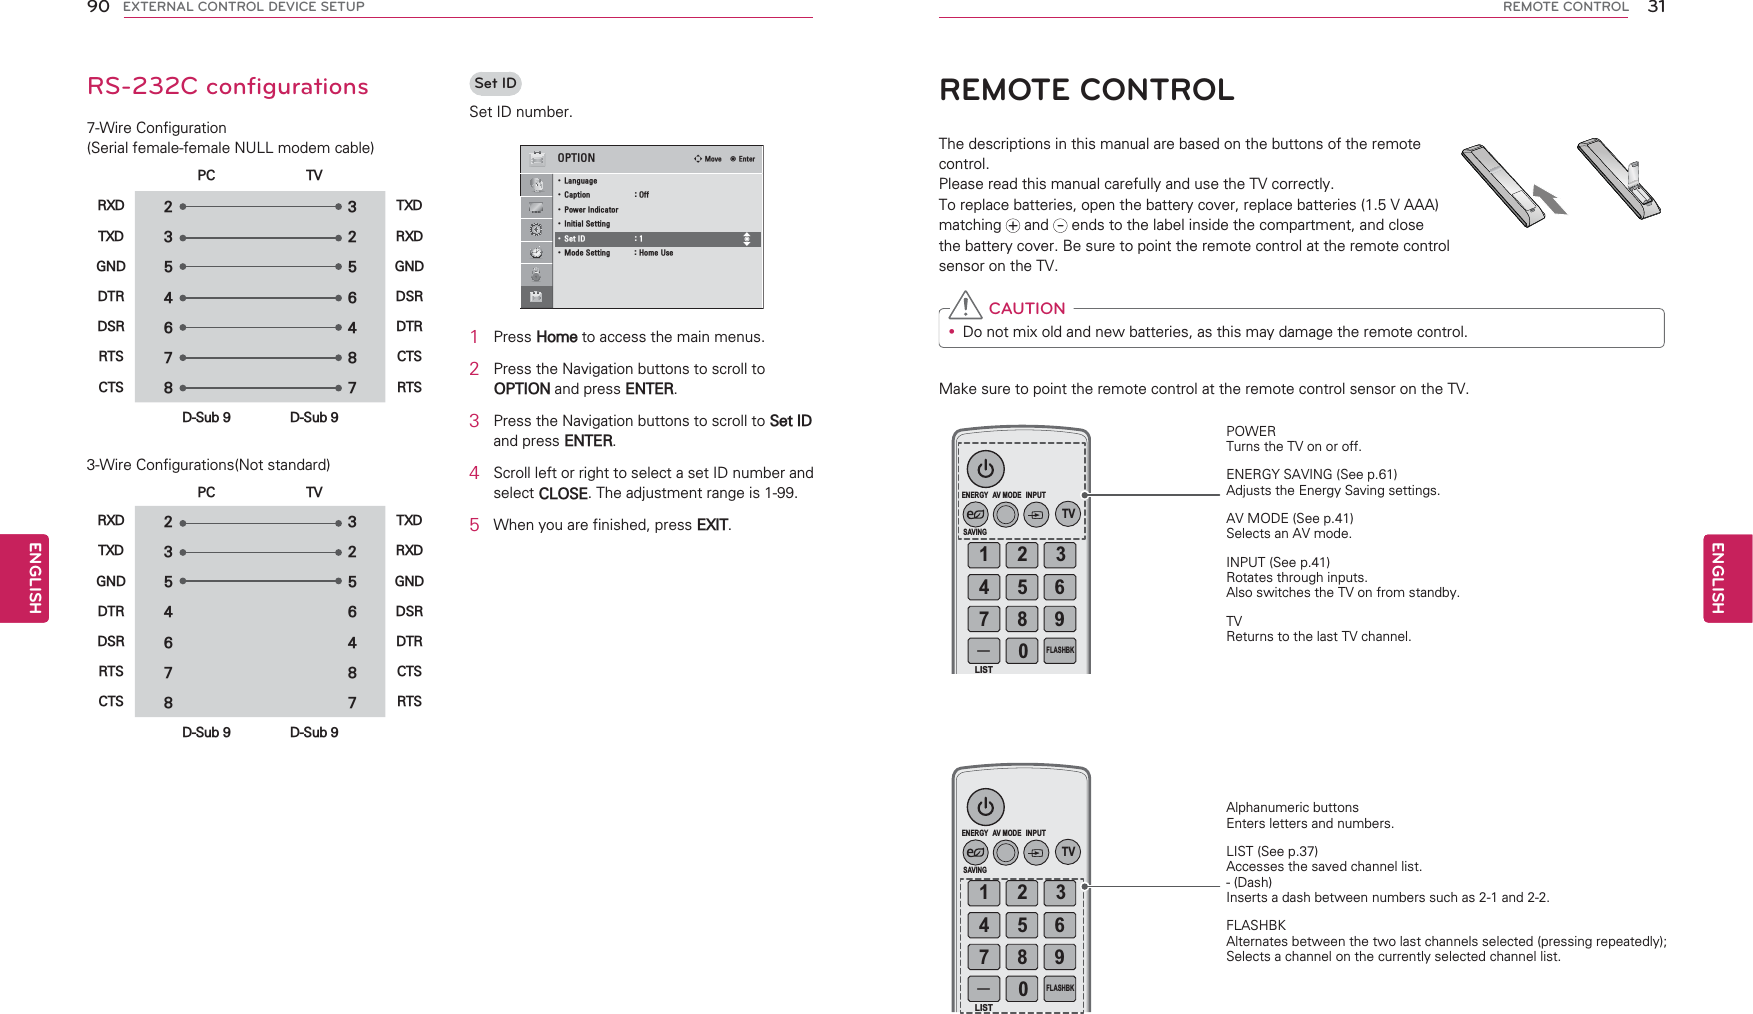 31ENGENGLISHREMOTE CONTROLMake sure to point the remote control at the remote control sensor on the TV.REMOTE CONTROLThe descriptions in this manual are based on the buttons of the remote control. Please read this manual carefully and use the TV correctly.To replace batteries, open the battery cover, replace batteries (1.5 V AAA) matching   and   ends to the label inside the compartment, and close the battery cover. Be sure to point the remote control at the remote control sensor on the TV. CAUTIONy Do not mix old and new batteries, as this may damage the remote control.ENERGY1234567809SAVINGTVAV MODEINPUTLISTFLASHBKENERGY1234567809SAVINGTVAV MODEINPUTLISTFLASHBKPOWER Turns the TV on or off.ENERGY SAVING (See p.61)Adjusts the Energy Saving settings.AV MODE (See p.41)Selects an AV mode.INPUT (See p.41)Rotates through inputs. Also switches the TV on from standby.TVReturns to the last TV channel.Alphanumeric buttons Enters letters and numbers.LIST (See p.37)Accesses the saved channel list.- (Dash) Inserts a dash between numbers such as 2-1 and 2-2.FLASHBKAlternates between the two last channels selected (pressing repeatedly); Selects a channel on the currently selected channel list.90ENGENGLISHEXTERNAL CONTROL DEVICE SETUPRS-232C configurations7-Wire Configuration  (Serial female-female NULL modem cable)PC TVRXD 23TXDTXD 32RXDGND 55GNDDTR 46DSRDSR 64DTRRTS 78CTSCTS 87RTSD-Sub 9 D-Sub 93-Wire Configurations(Not standard)PC TVRXD 23TXDTXD 32RXDGND 55GNDDTR 46DSRDSR 64DTRRTS 78CTSCTS 87RTSD-Sub 9 D-Sub 9Set IDSet ID number.237,21 ᯒ0RYHᯙ(QWHUᯐᯙؒ /DQJXDJHؒ &amp;DSWLRQ 2IIؒ 3RZHU,QGLFDWRUؒ ,QLWLDO6HWWLQJؒ 6HW,&apos; ؒ 0RGH6HWWLQJ +RPH8VH1 Press Home to access the main menus.2  Press the Navigation buttons to scroll to OPTION and press ENTER.3  Press the Navigation buttons to scroll to Set ID and press ENTER.4  Scroll left or right to select a set ID number and select CLOSE. The adjustment range is 1-99.5  When you are finished, press EXIT.